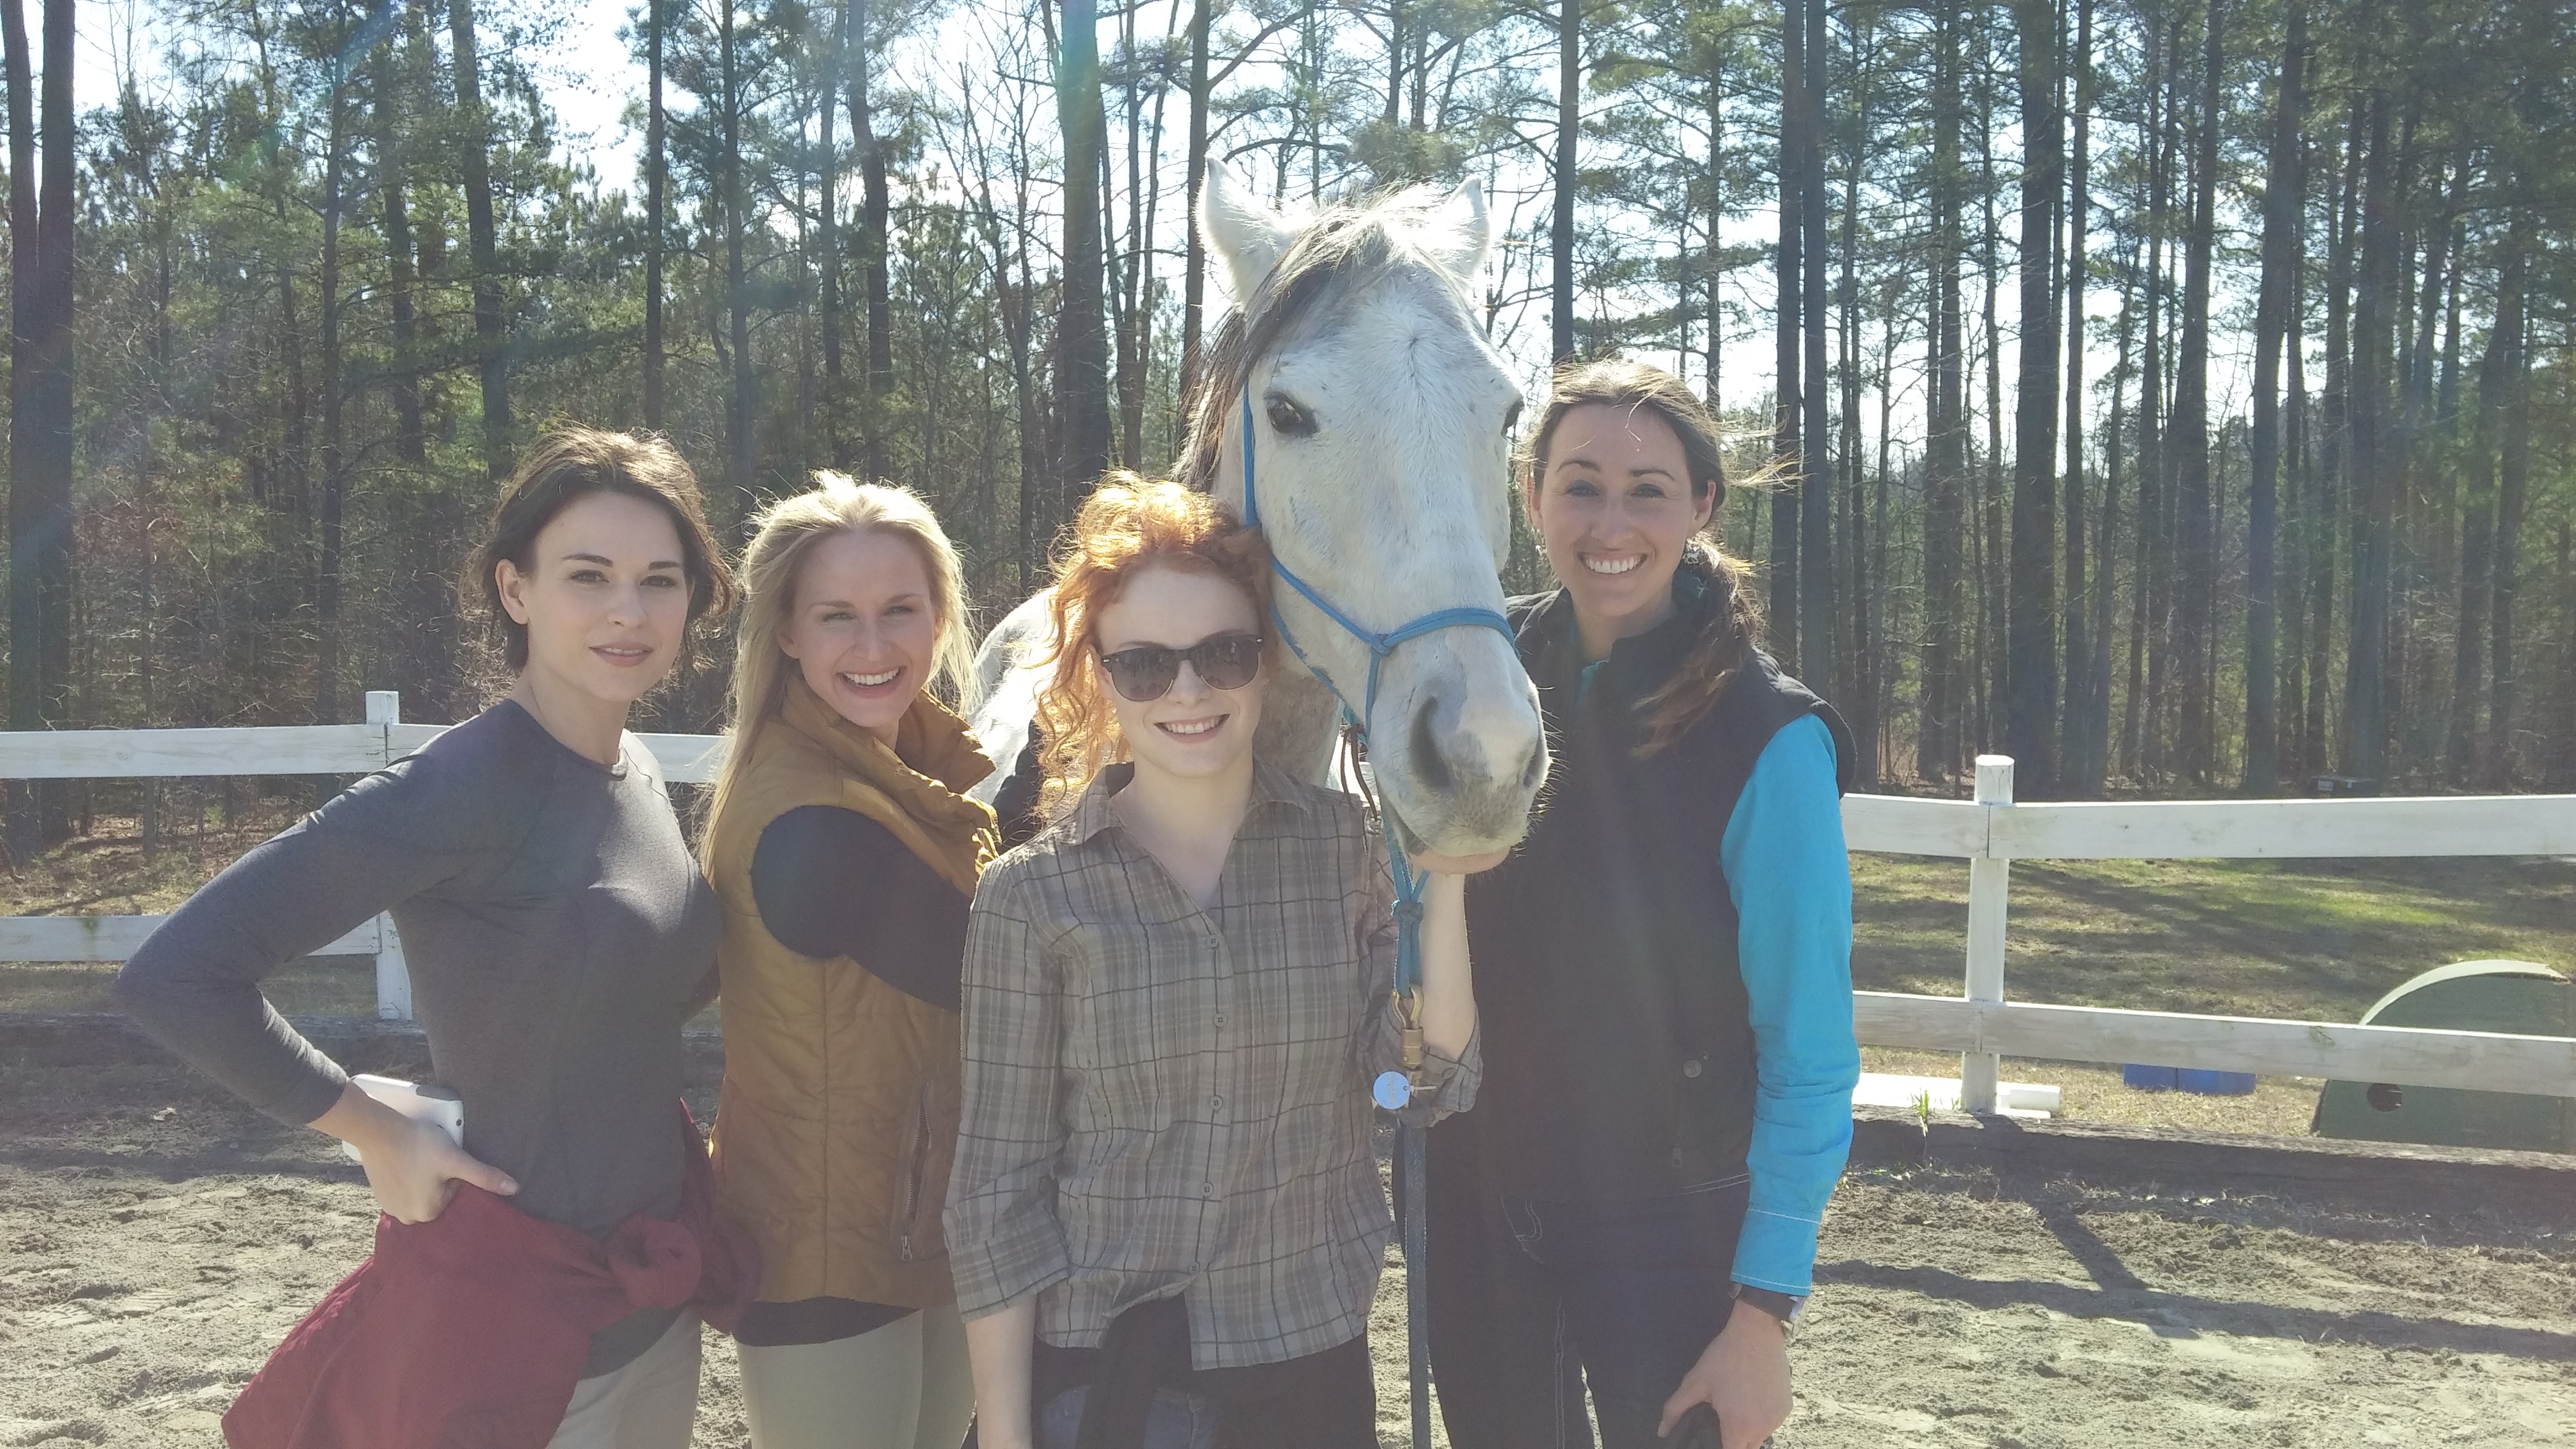 On set with the ladies of 'Unbridled' - from left: Rachel Hendrix, Jenn Gotzon, Tea McKay, Soar (horse), and Lindsey